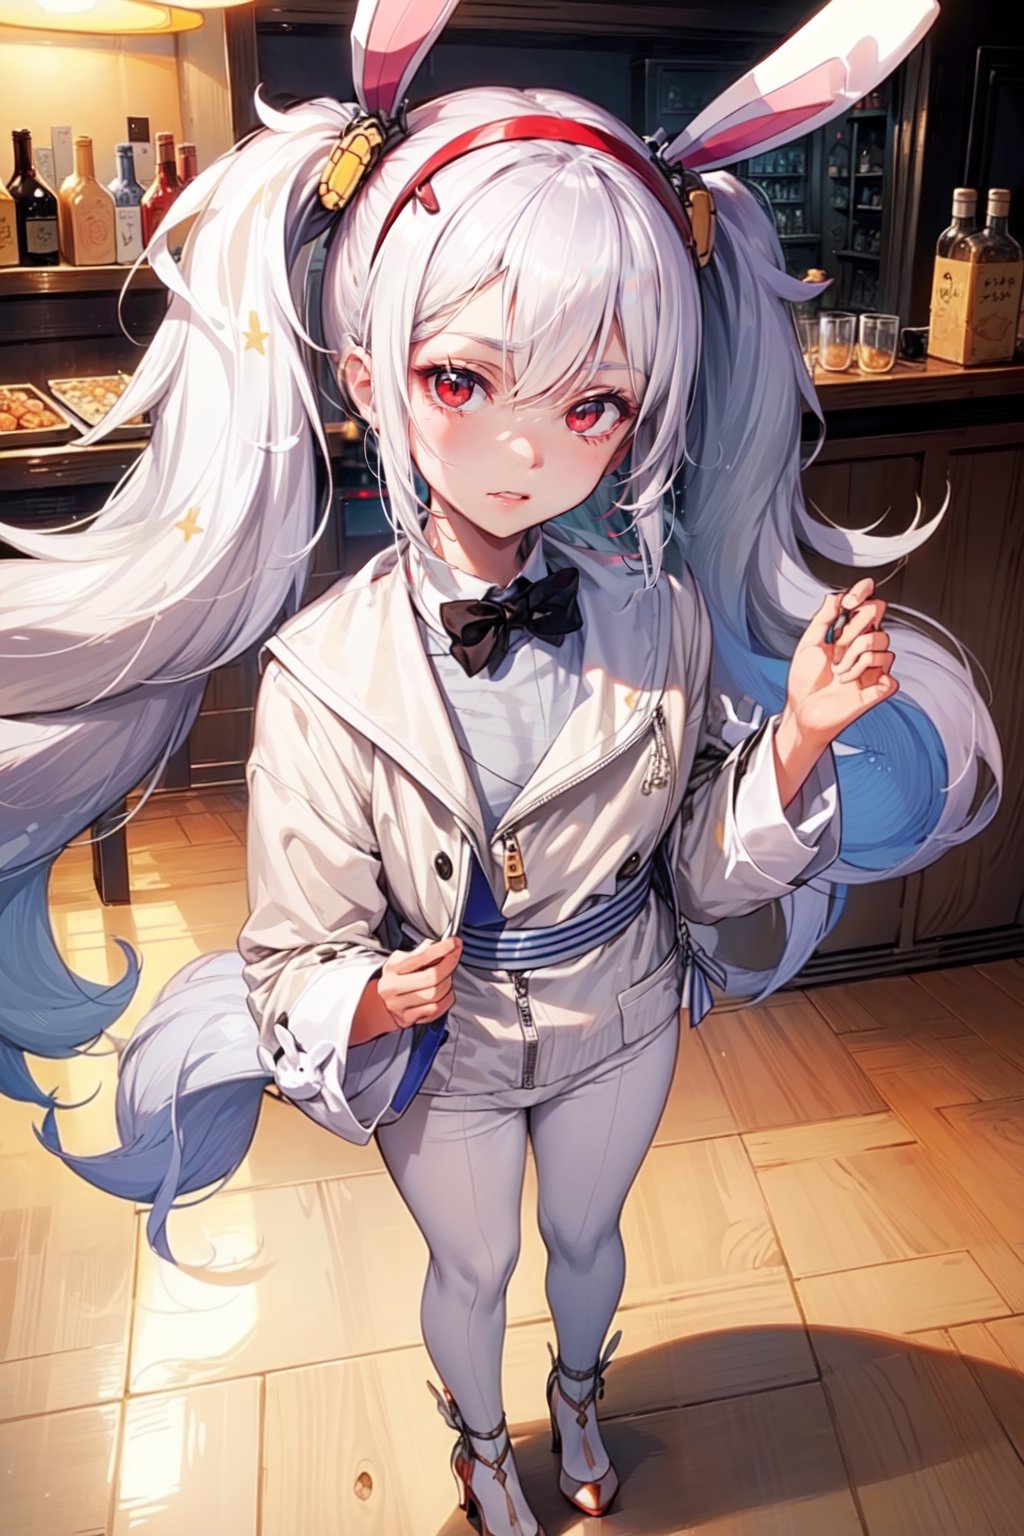 1 girl, solo, long hair, detailed eyes, bar background, blushing, ((soft smile)), standing, blushing, clear eyes, bright eyes, detailed eyes, (close-up),High detailed ,perfect light,hime style, bunny suit,aalaffey, high heels, disco flooring, spotlight,animal ears, cute bunny outfit, focus, bar interior